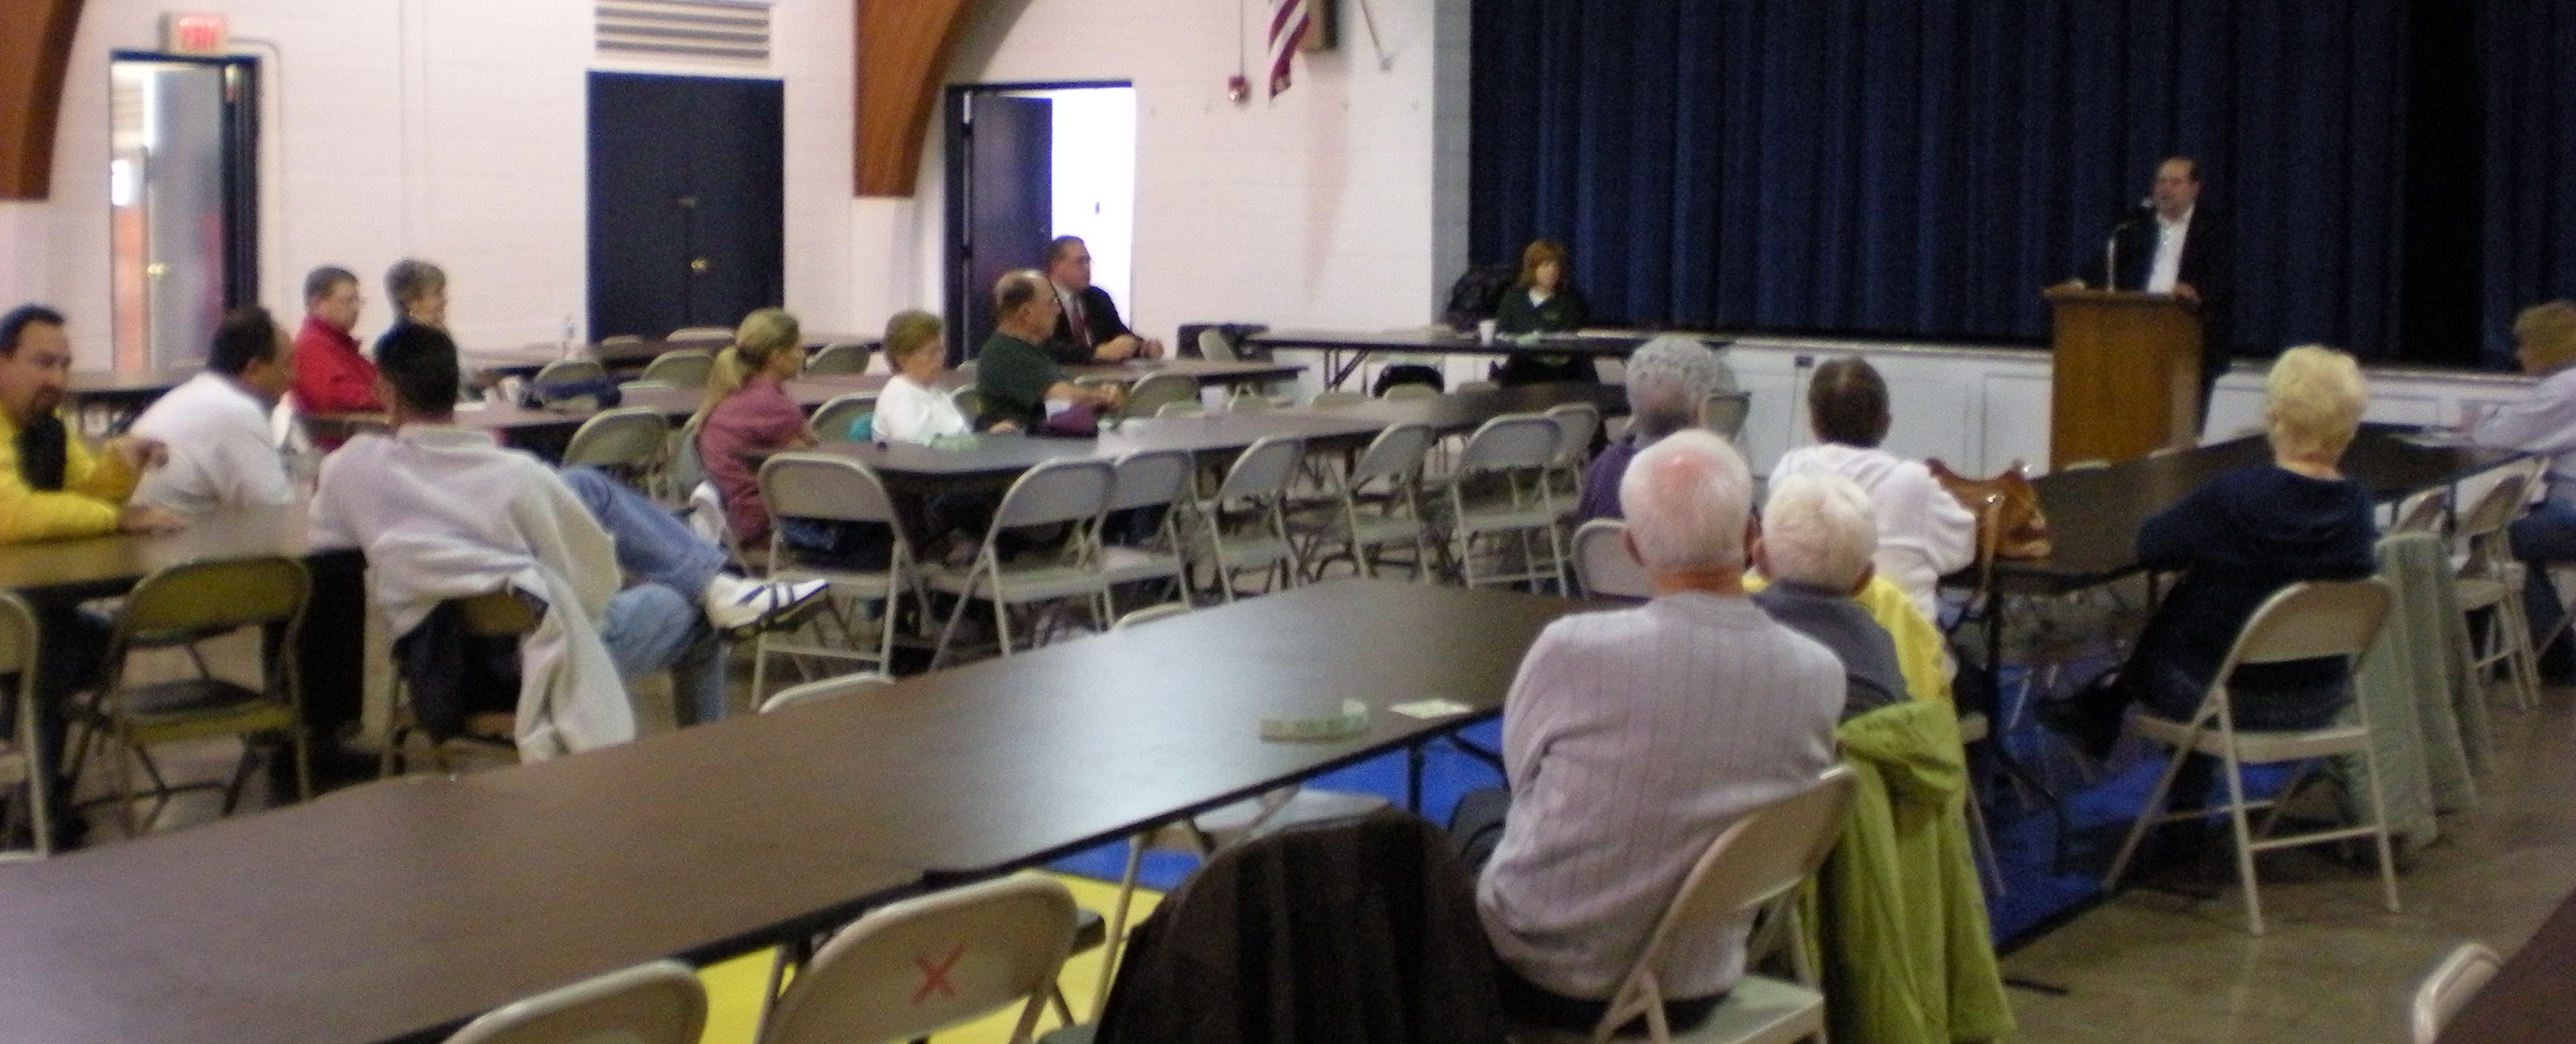 Upper Holmesburg Civic Association President Stan Cywinski discusses zoning issues. Photo by Christopher Wink.